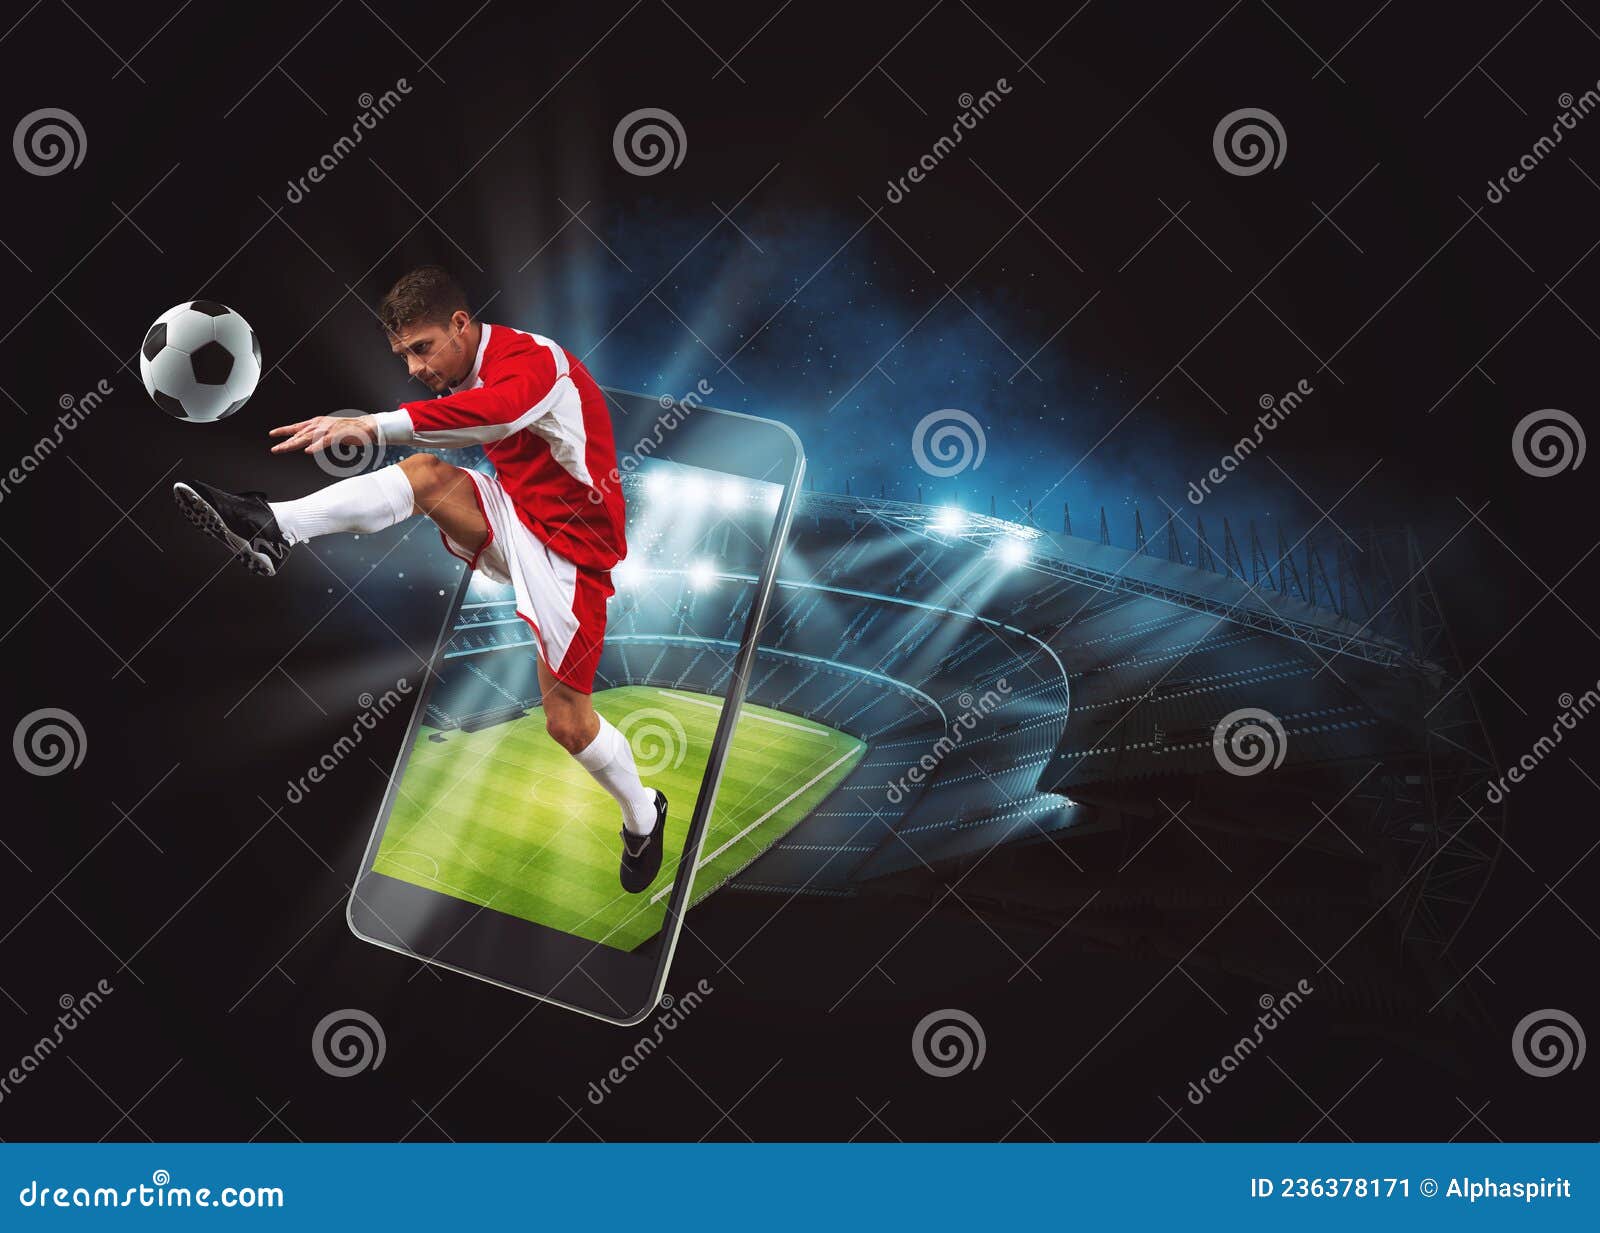 Watch Live Football And Other Sports On FutebolPlayHD For Free